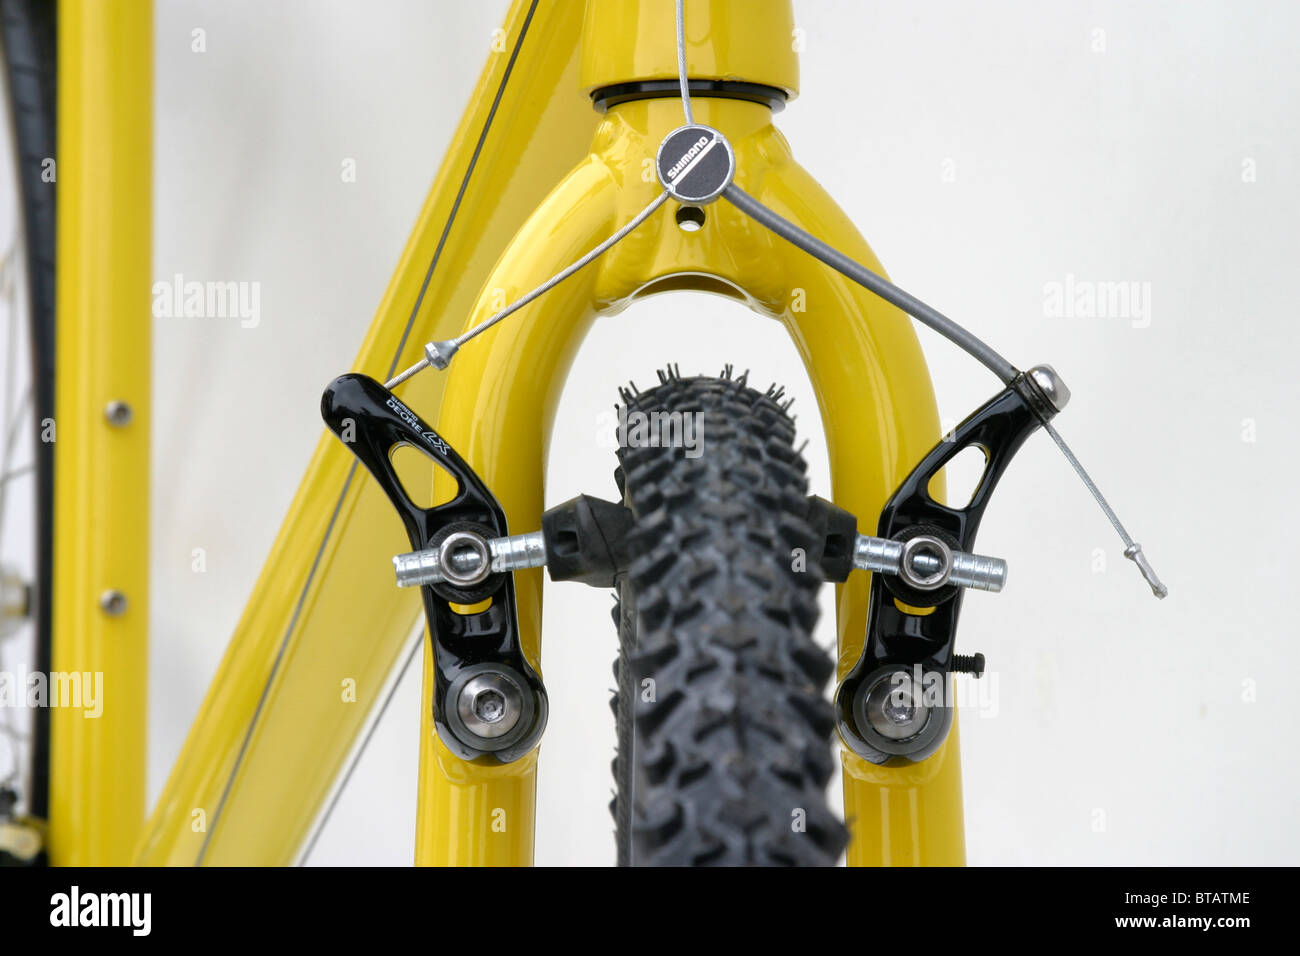 cutout closeup of front brake alloy yellow hybrid roadster trekking fitness training style bike with 700c size wheels Stock Photo